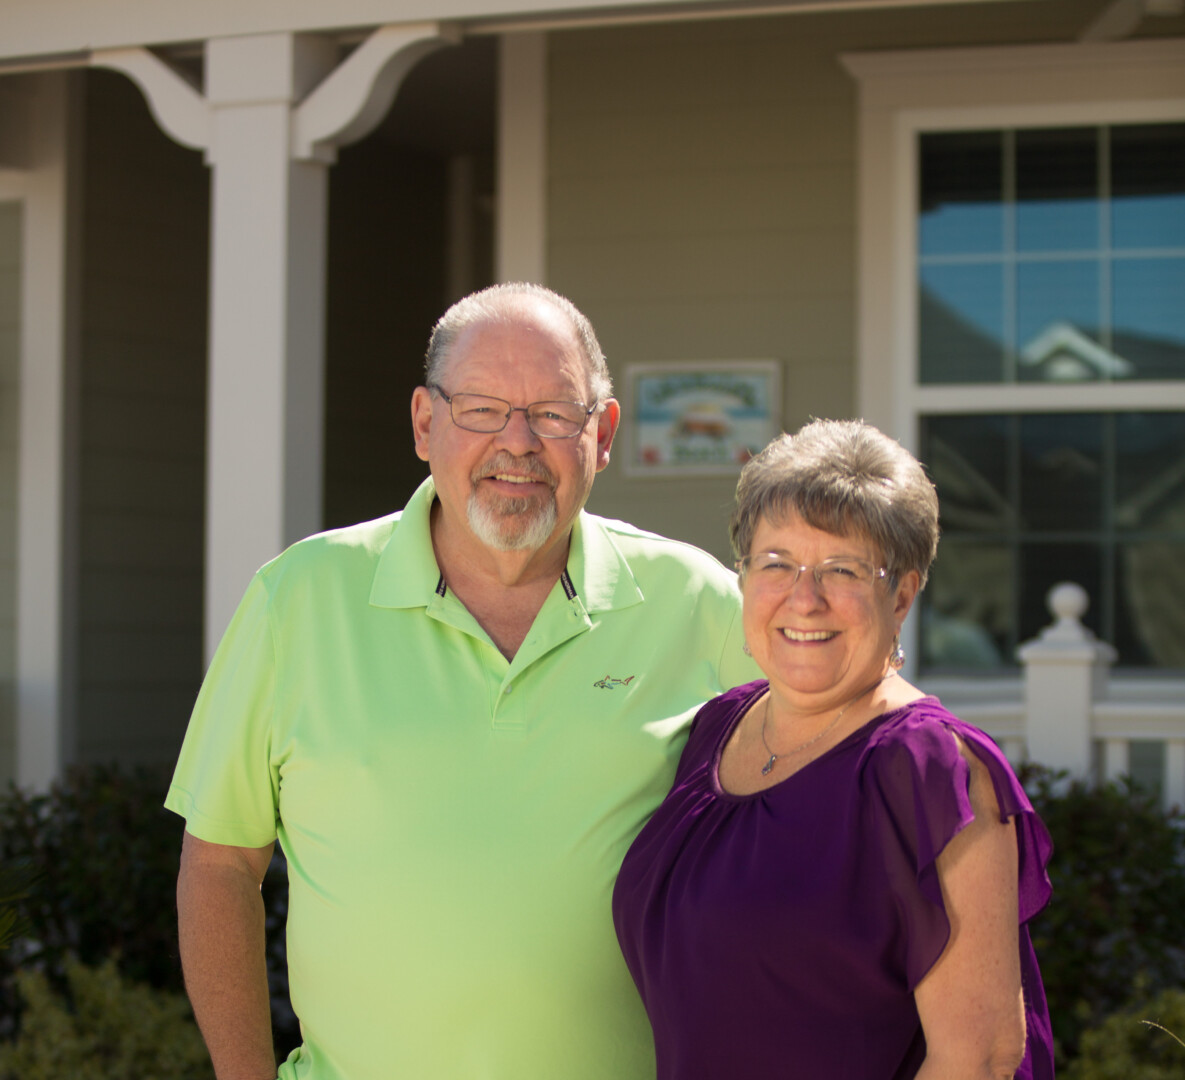 Q&A with Don and Linda Boucher